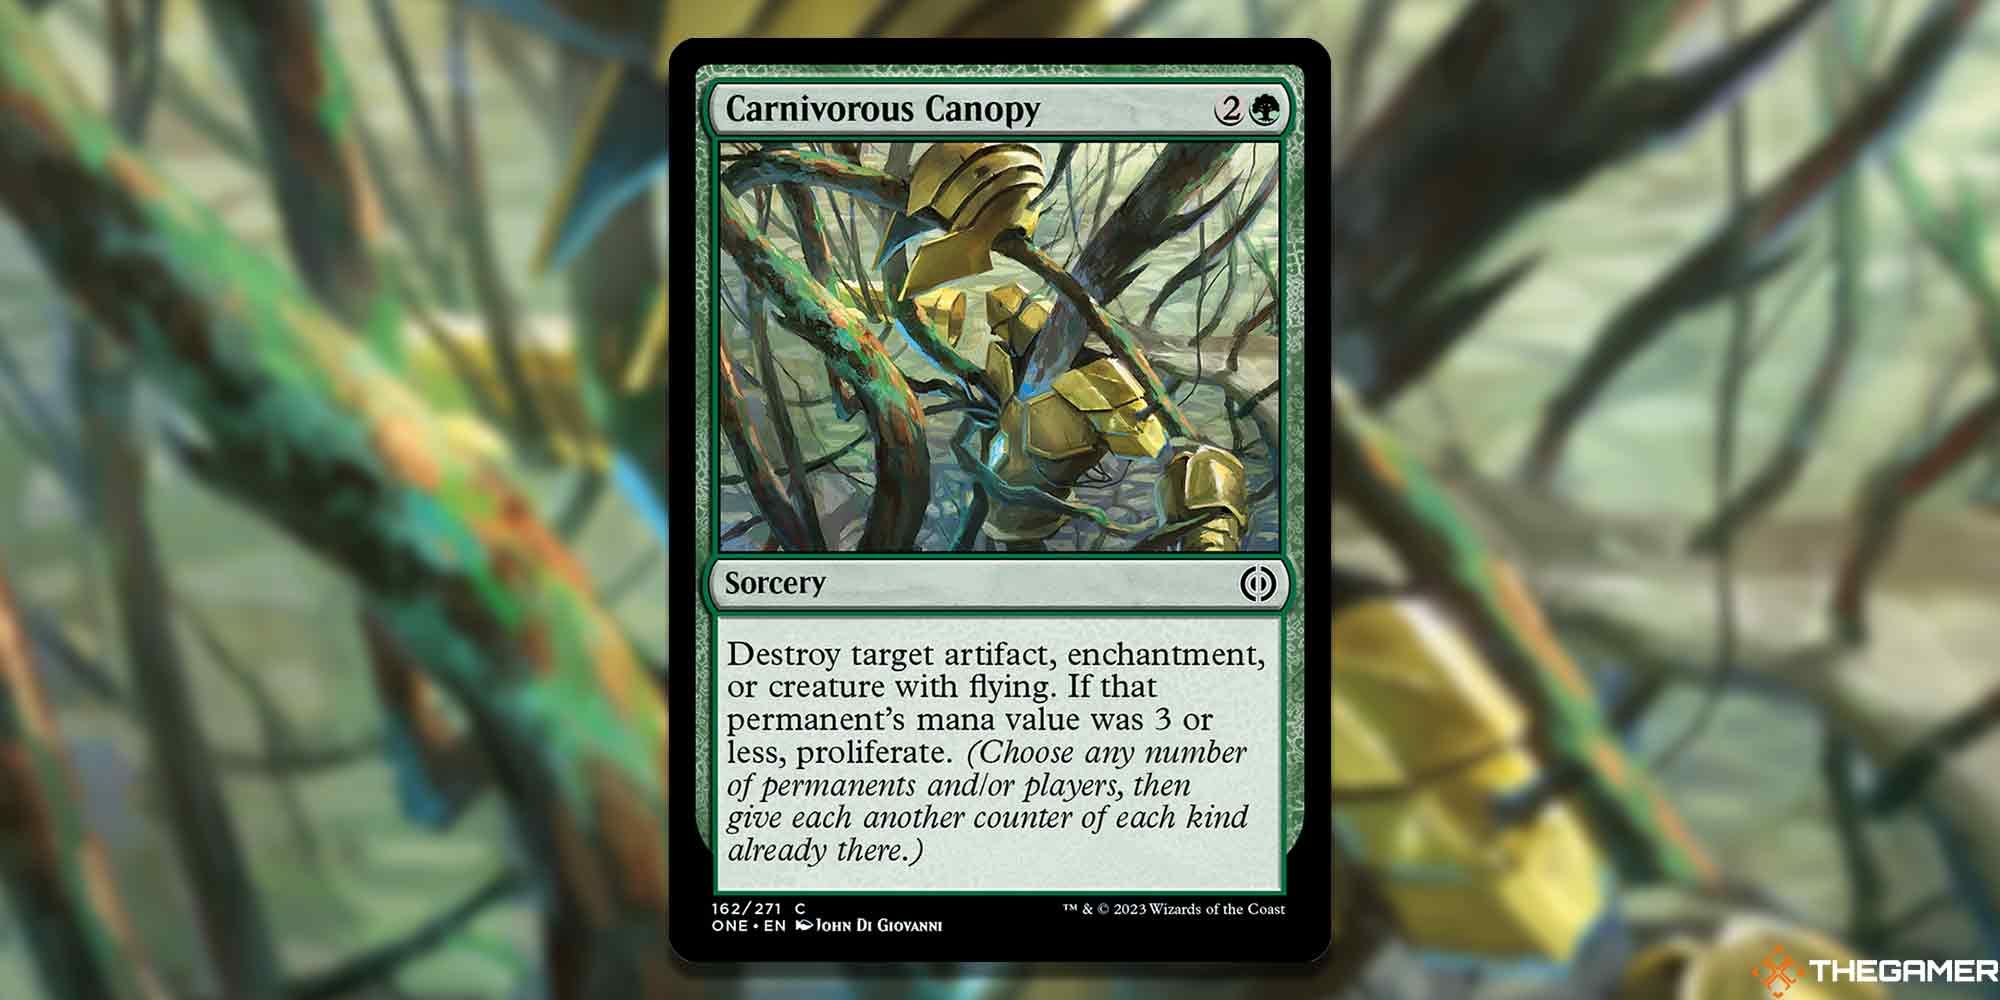 Image of Carnivorous Canopy card by John Di Giovanni